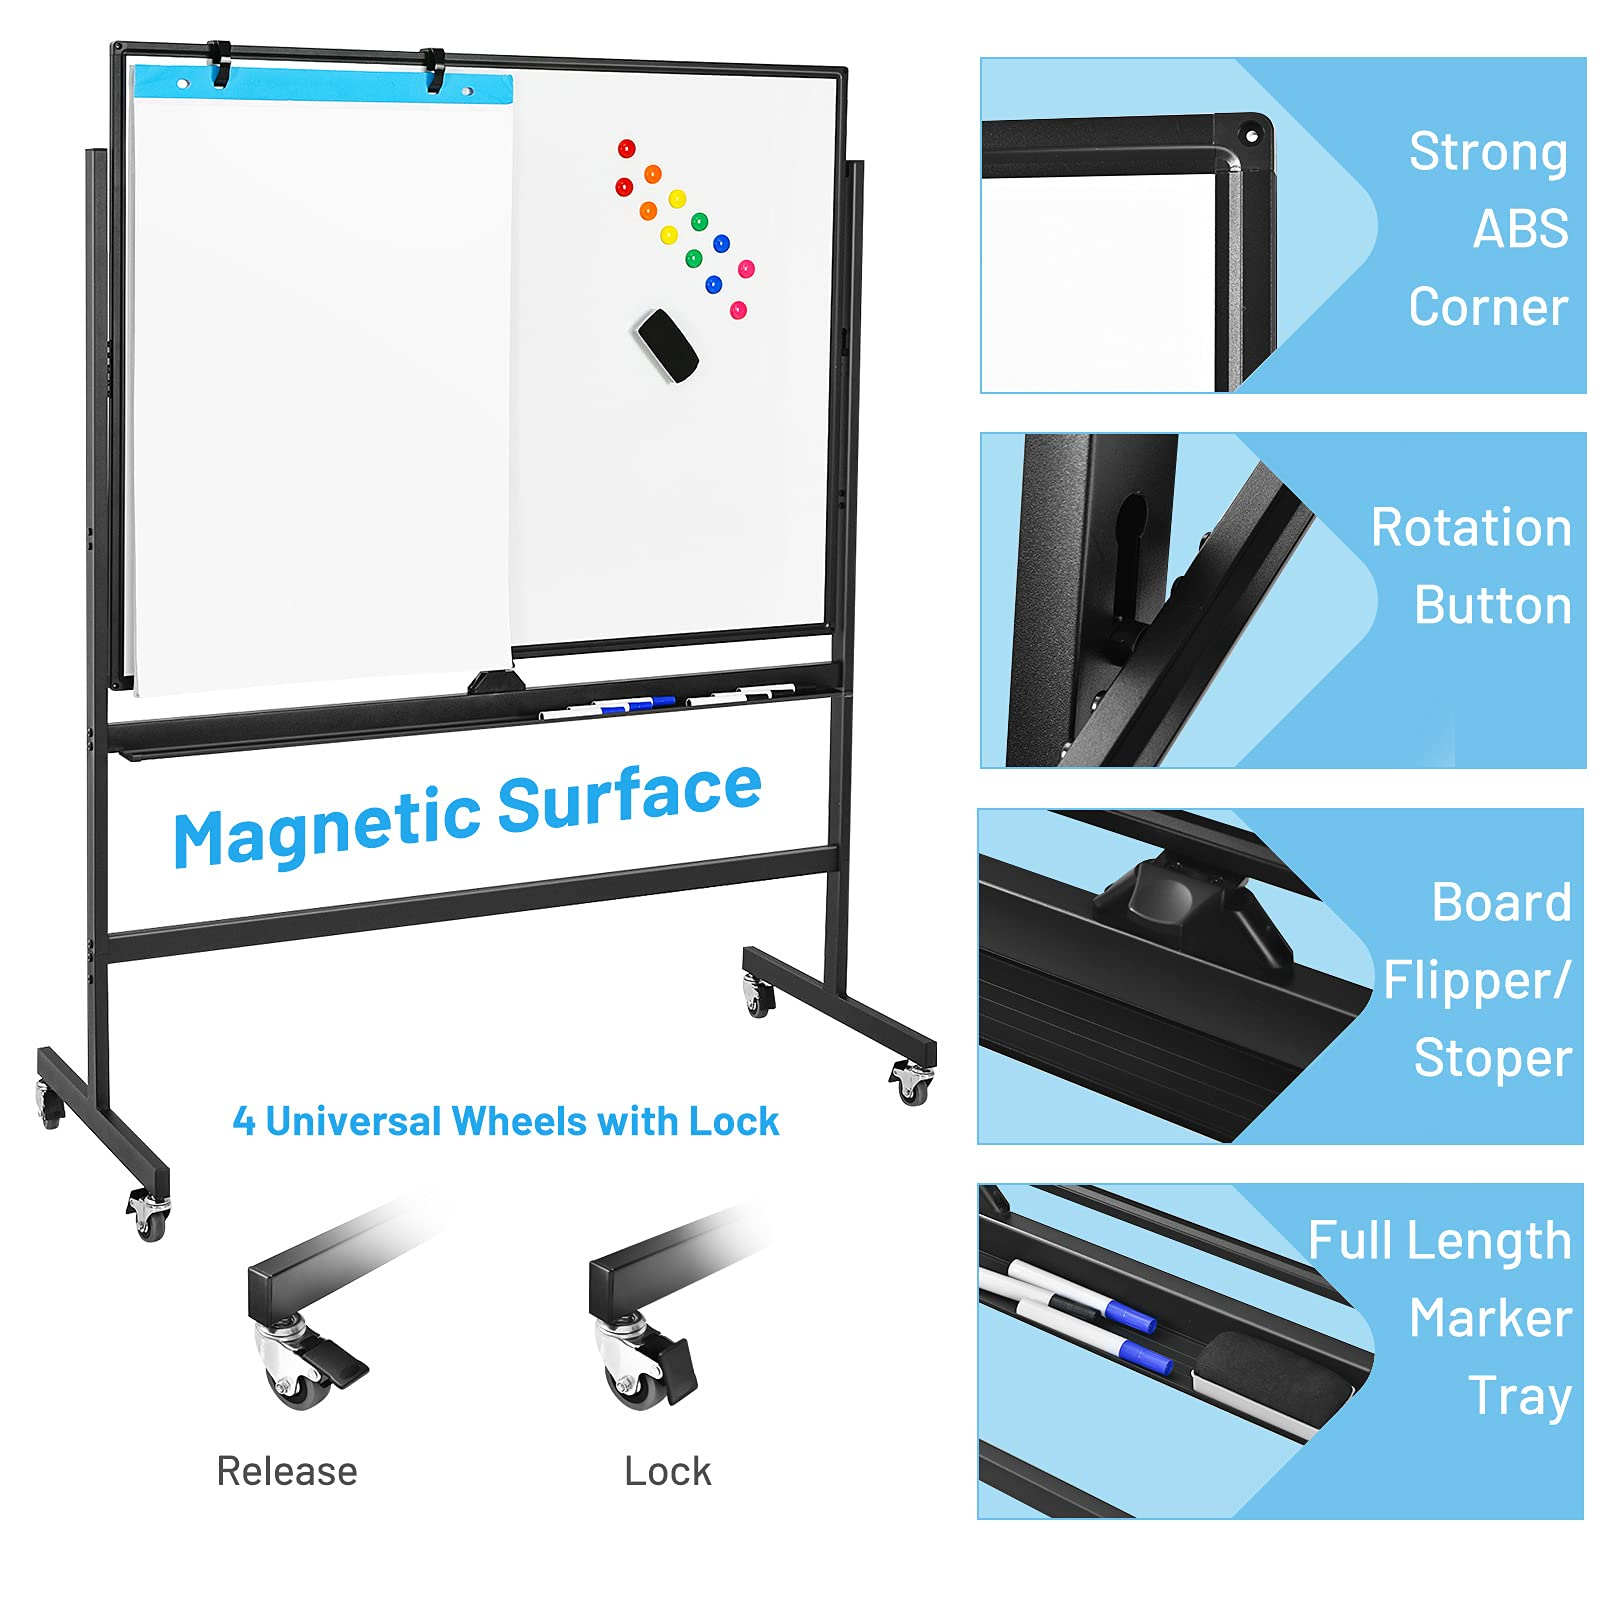 Double-Sided Magnetic Dry Erase Mobile Whiteboard - Giantex